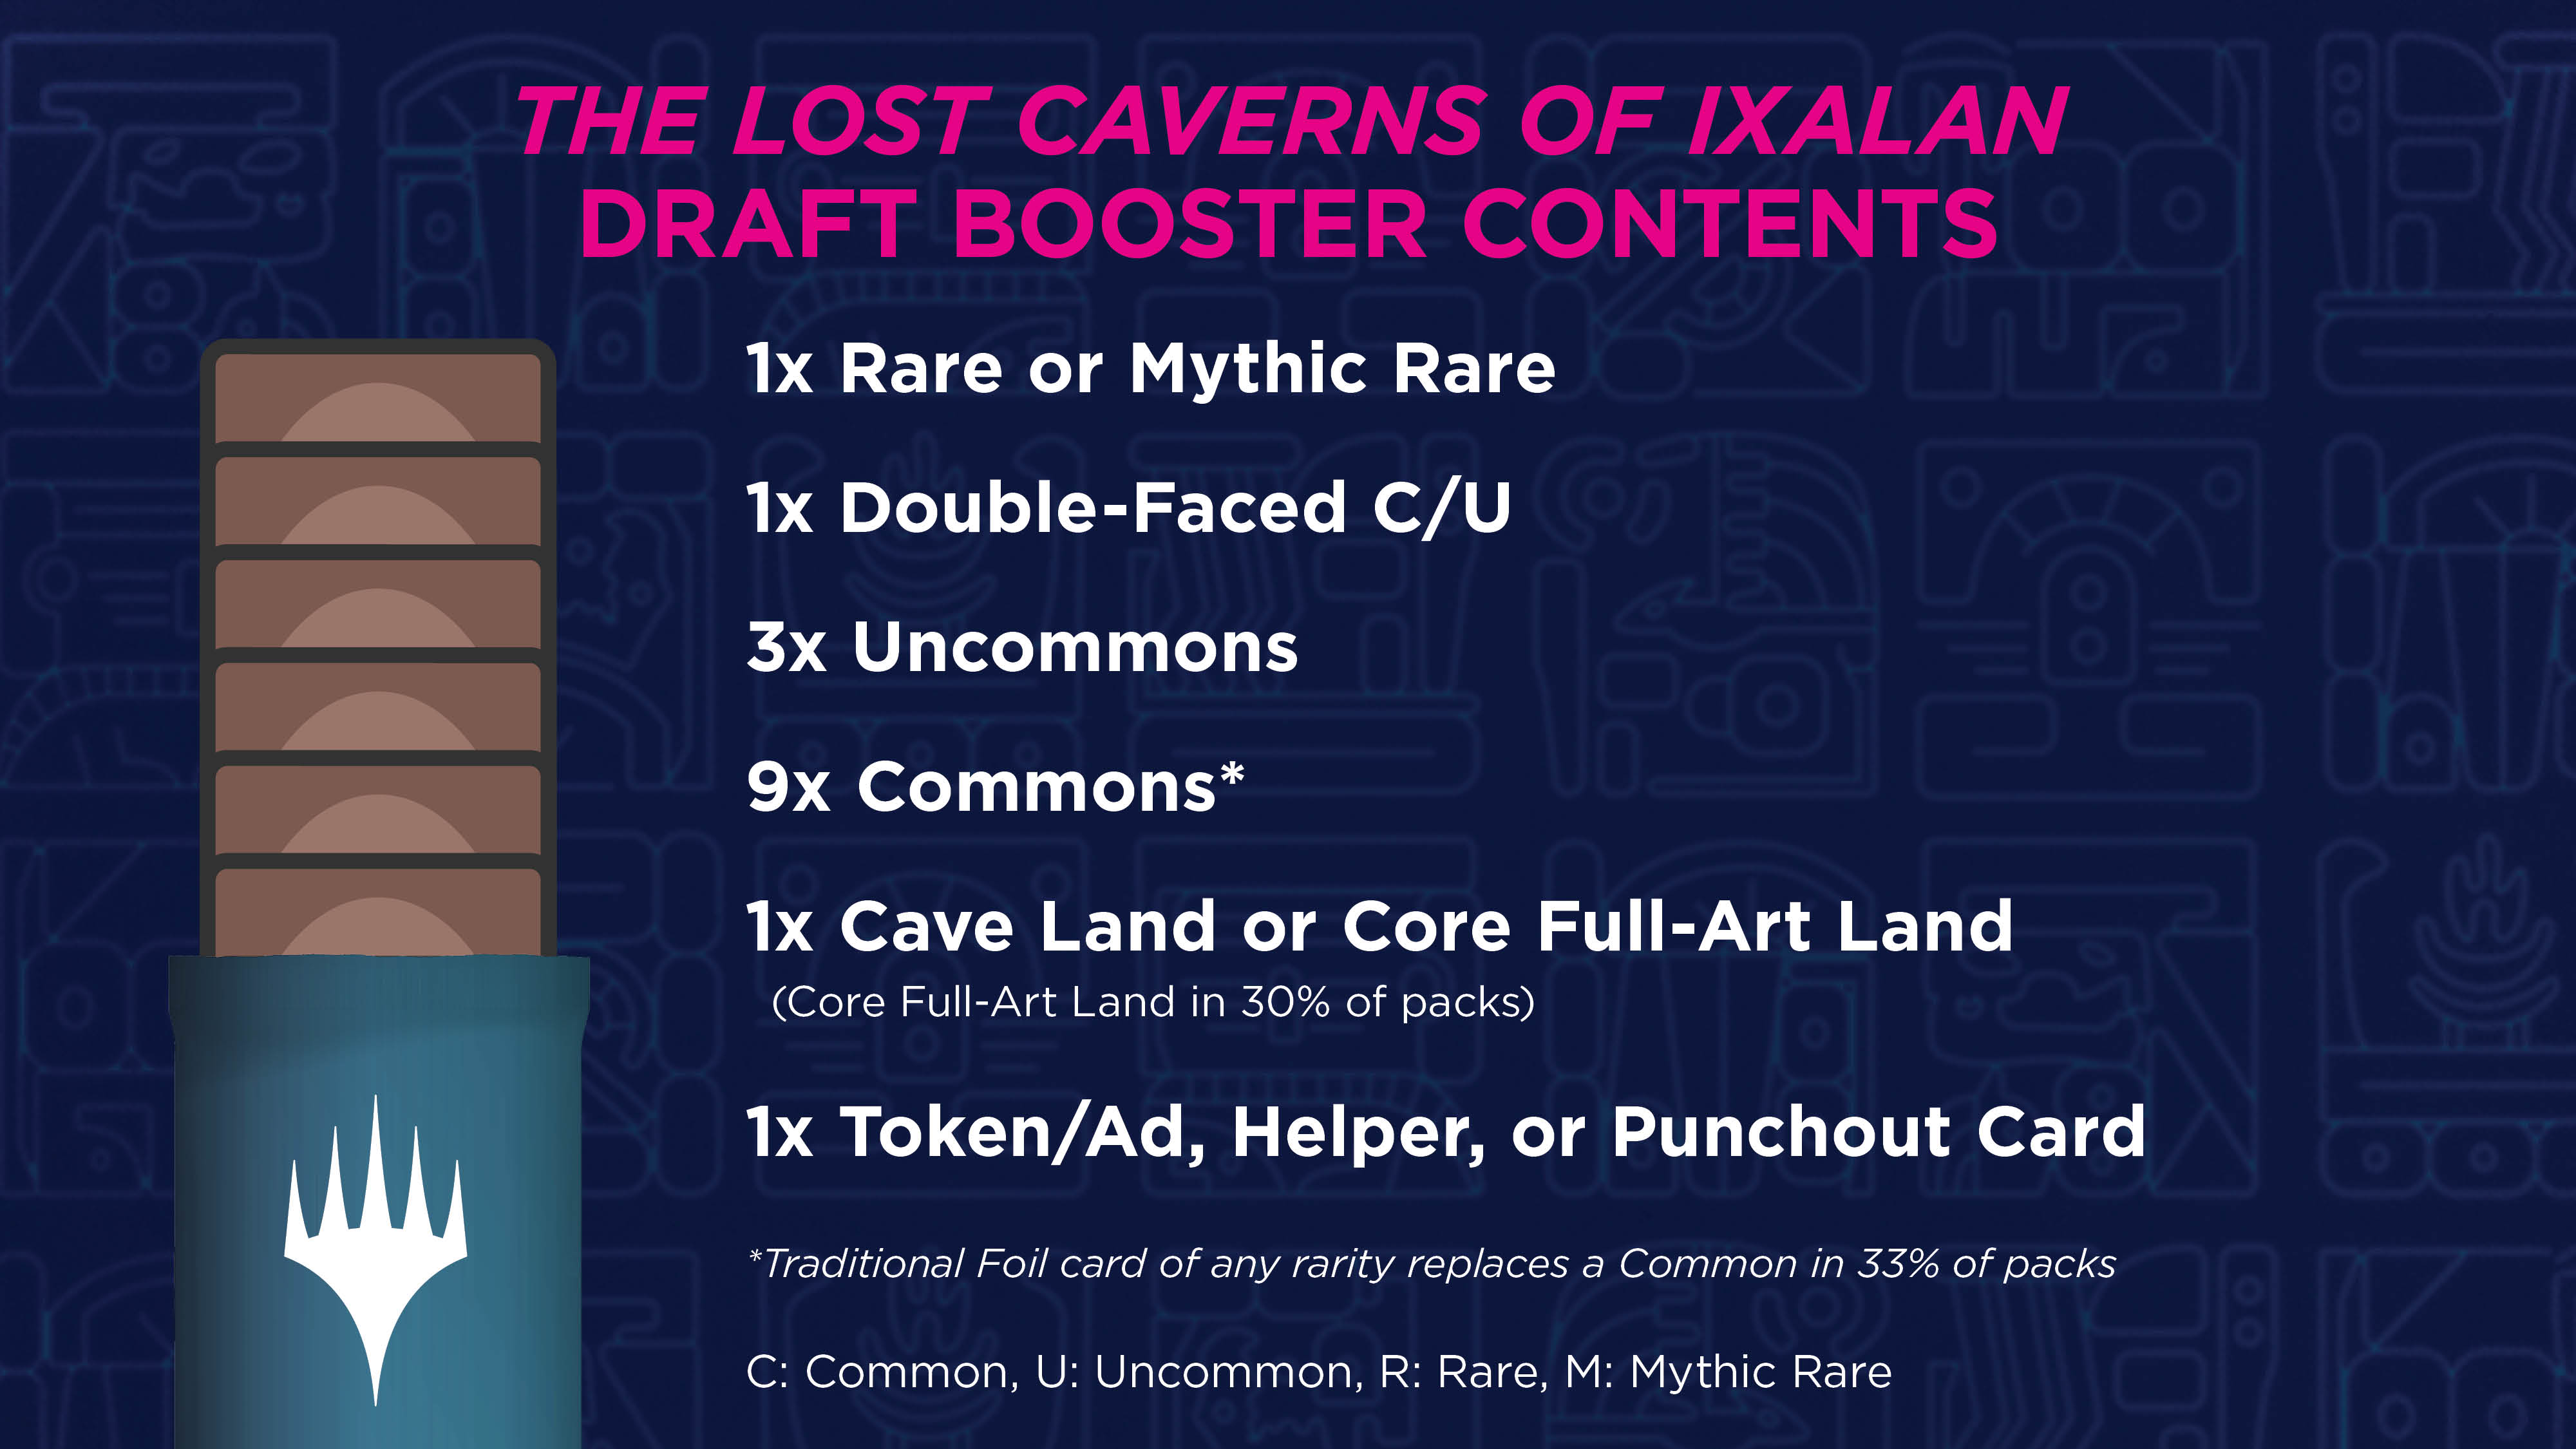 The Lost Caverns of Ixalan Draft Booster Breakdown